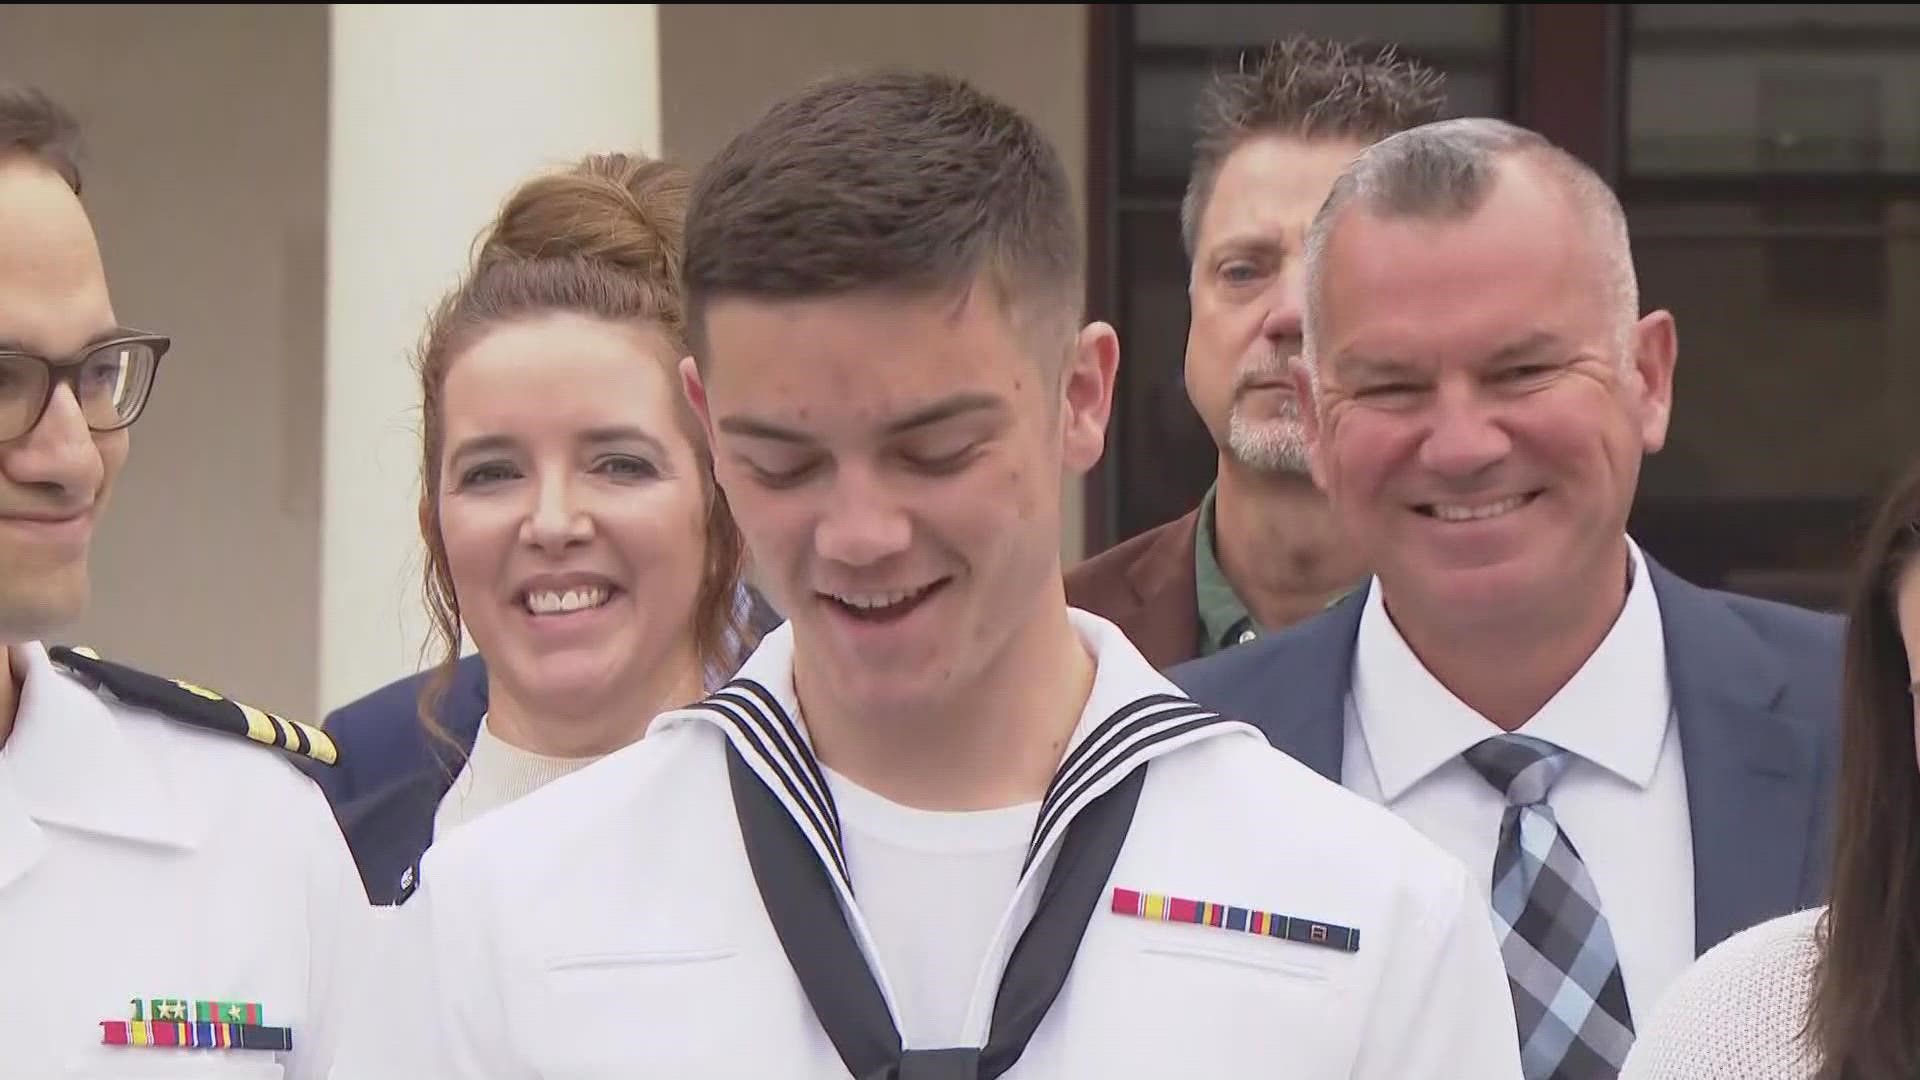 21-year-old Seaman Recruit Ryan Mays began sobbing immediately after verdict was read by the judge.